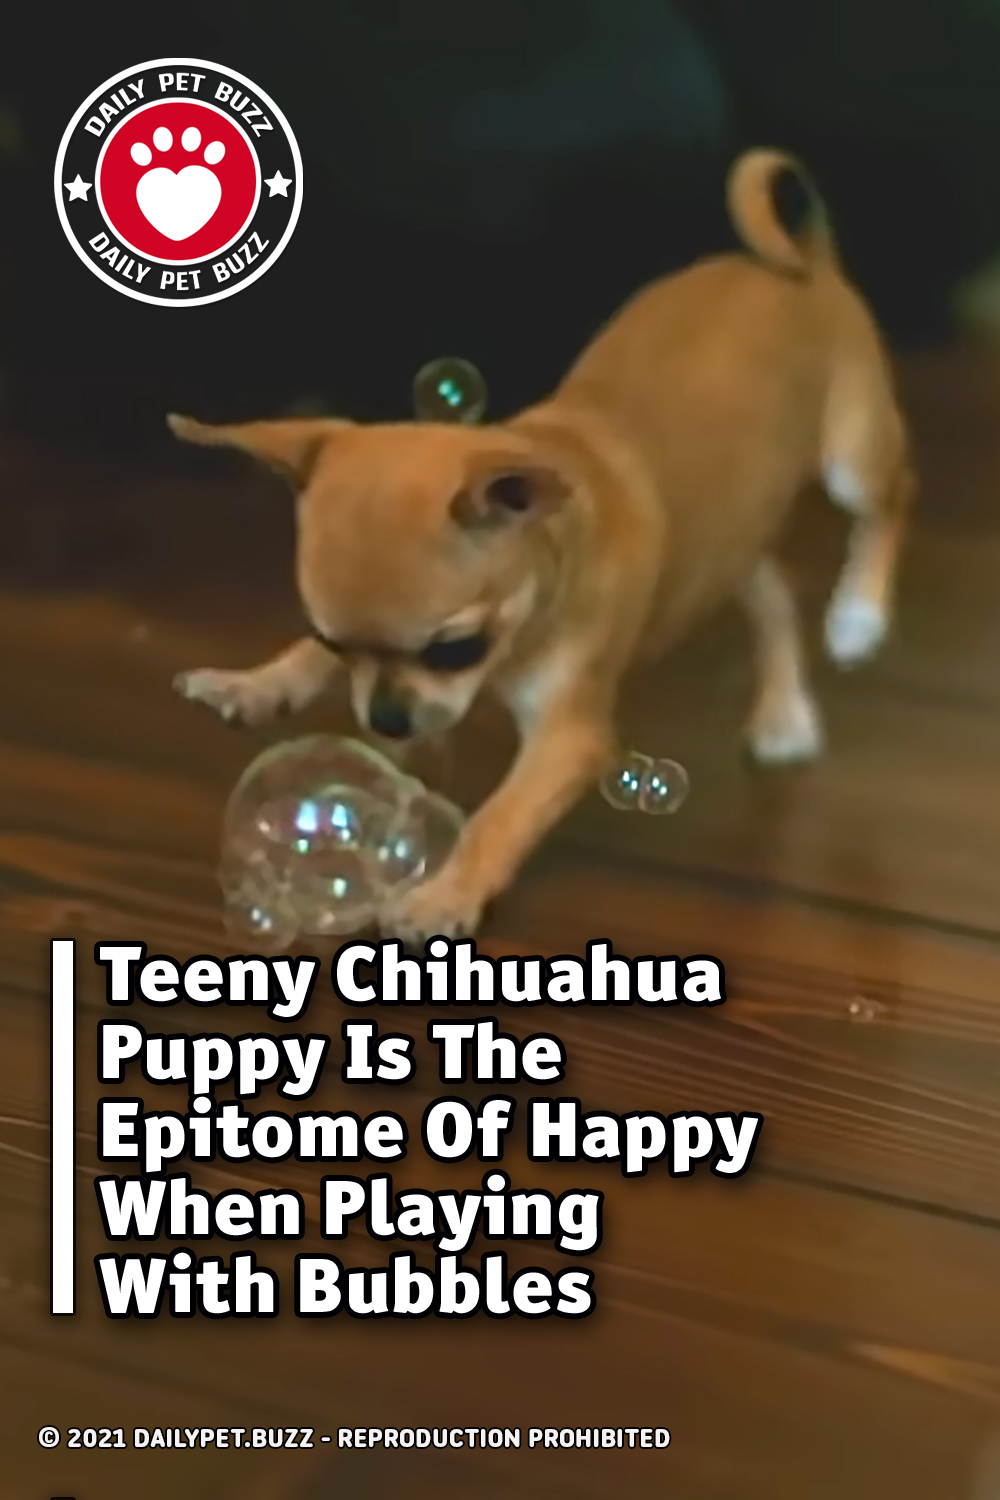 Teeny Chihuahua Puppy Is The Epitome Of Happy When Playing With Bubbles